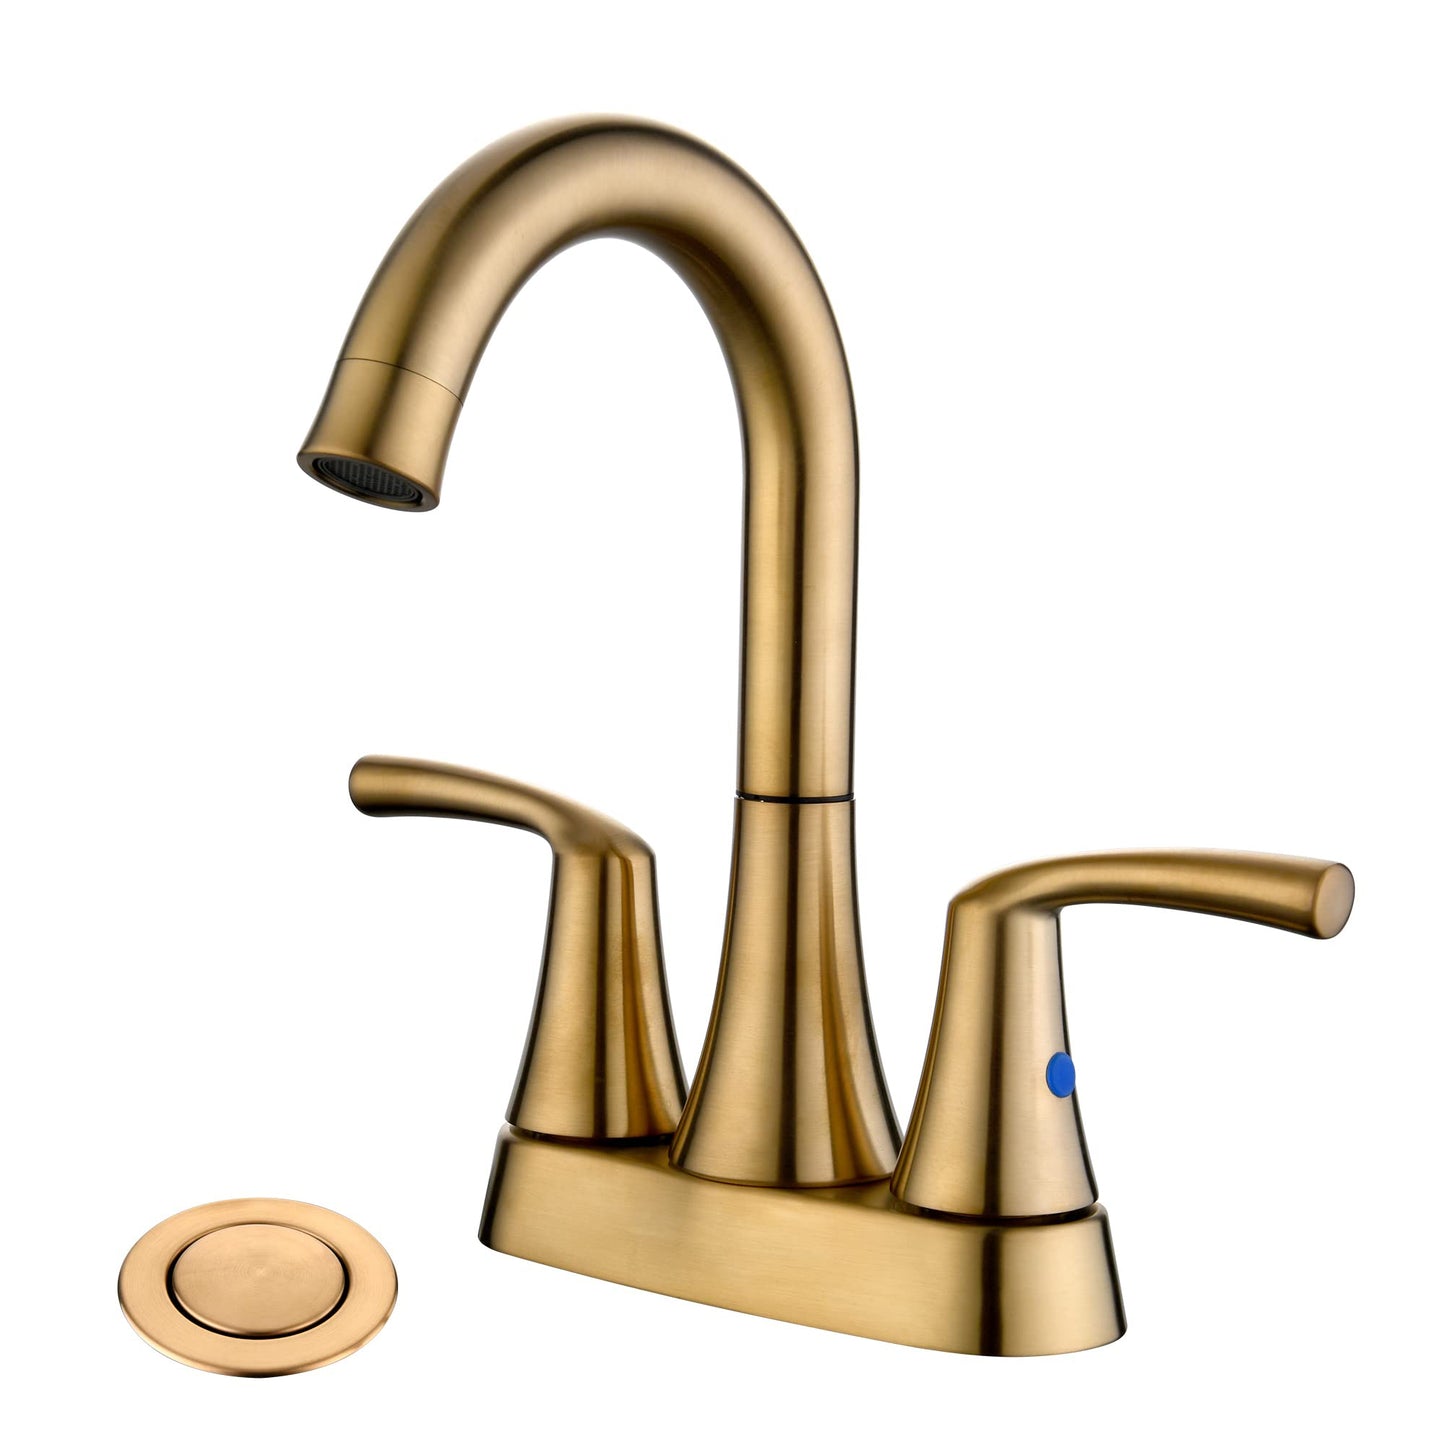 Bathroom Sink Faucet Set with 2 Handles, Gold Finish